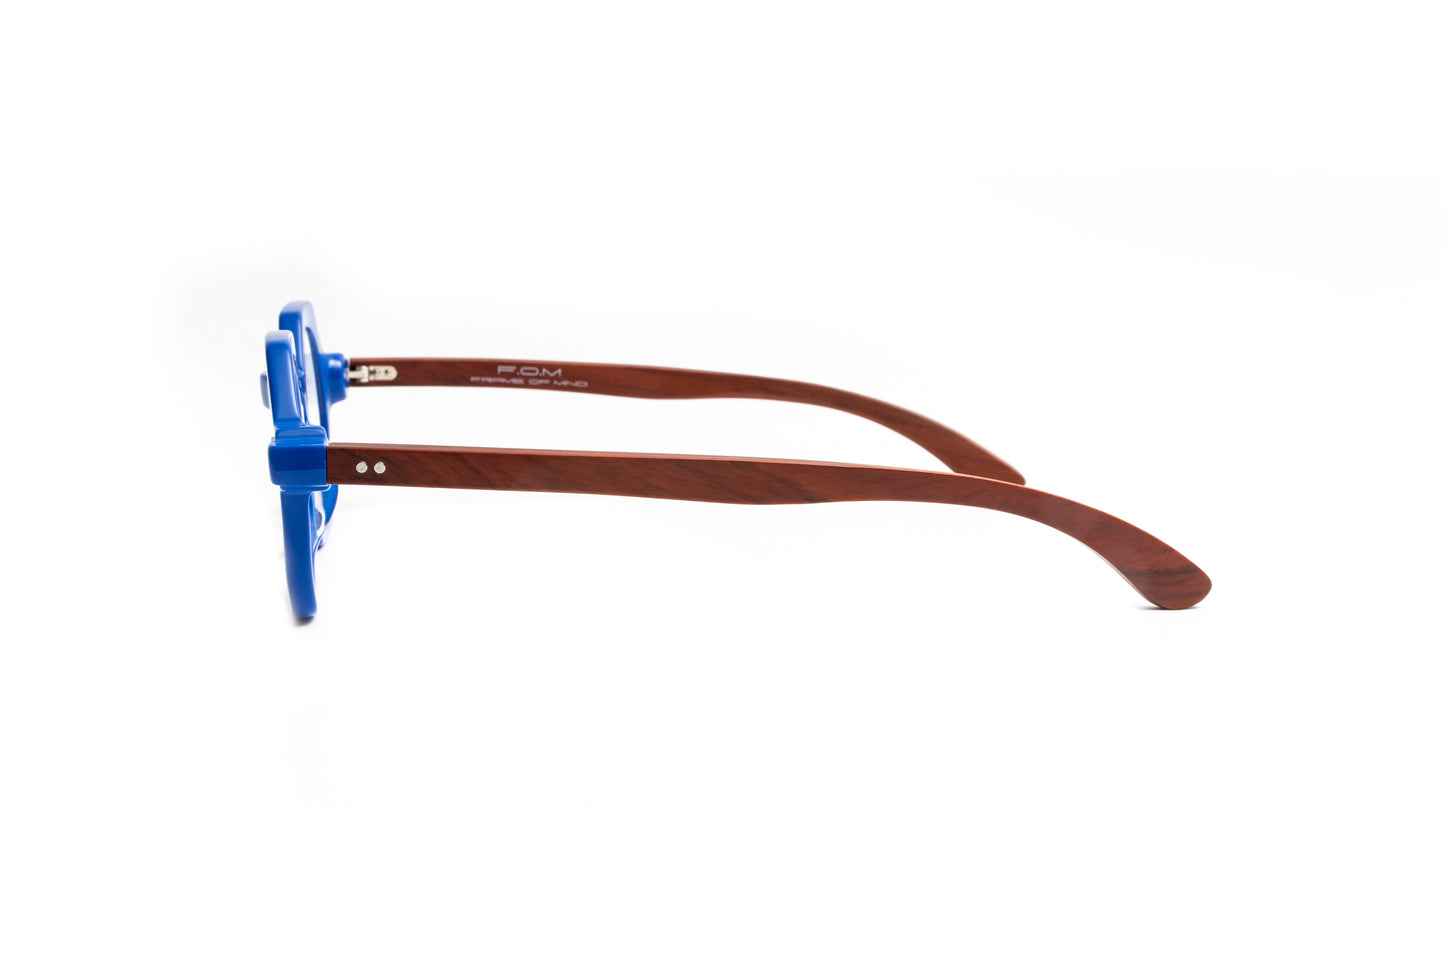 Round pantos blue reading glasses with cherry wood temples for men and women, designer readers, luxury reading glasses